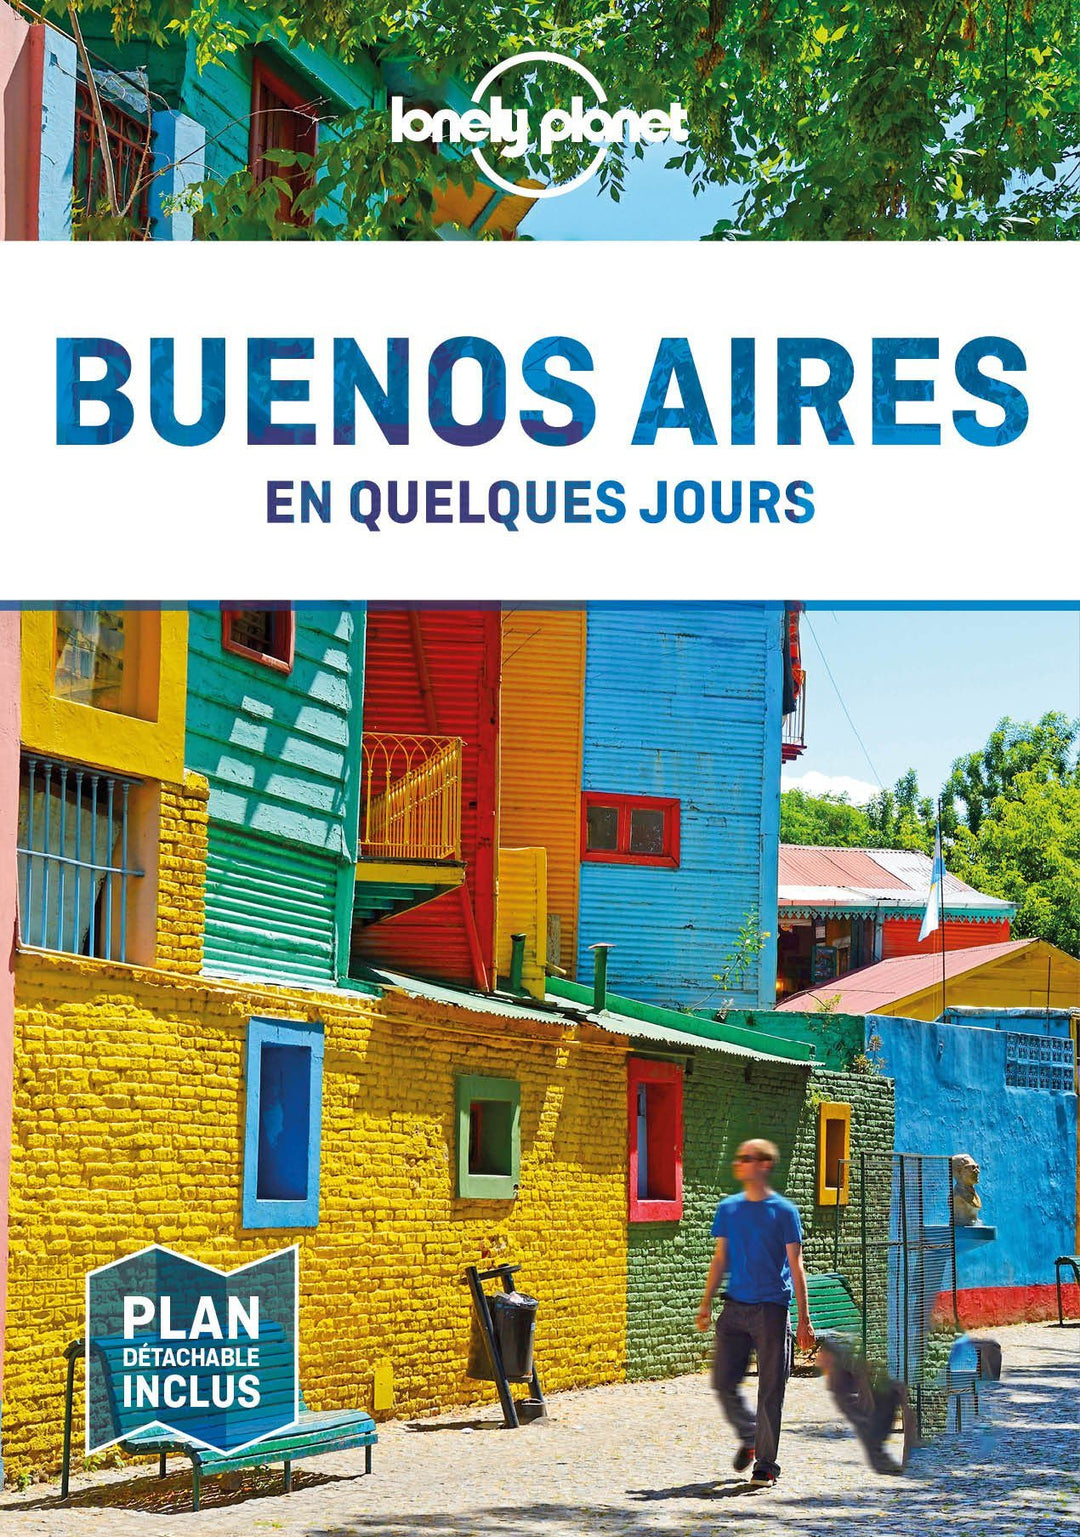 The Buenos Aires Guide